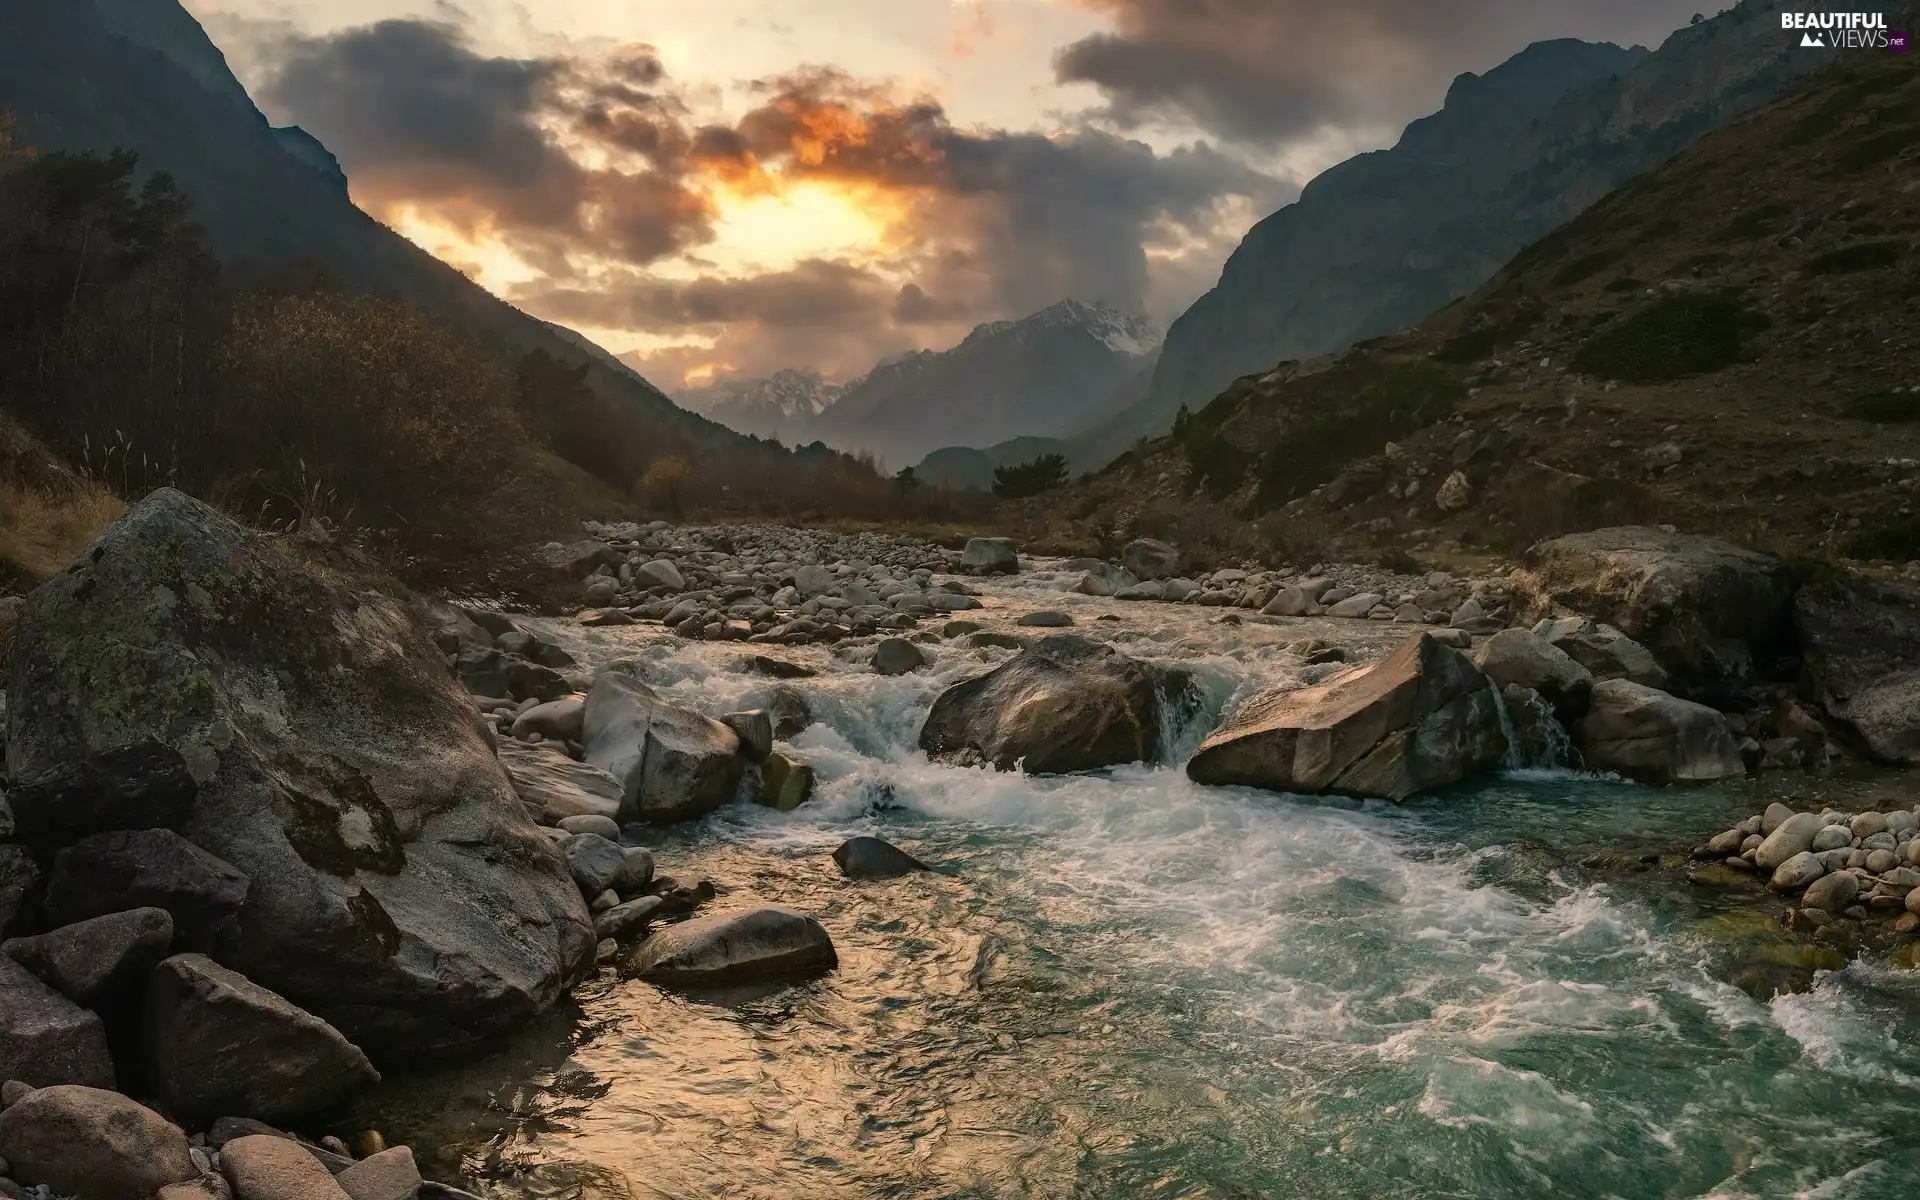 Stones, clouds, River, boulders, Mountains